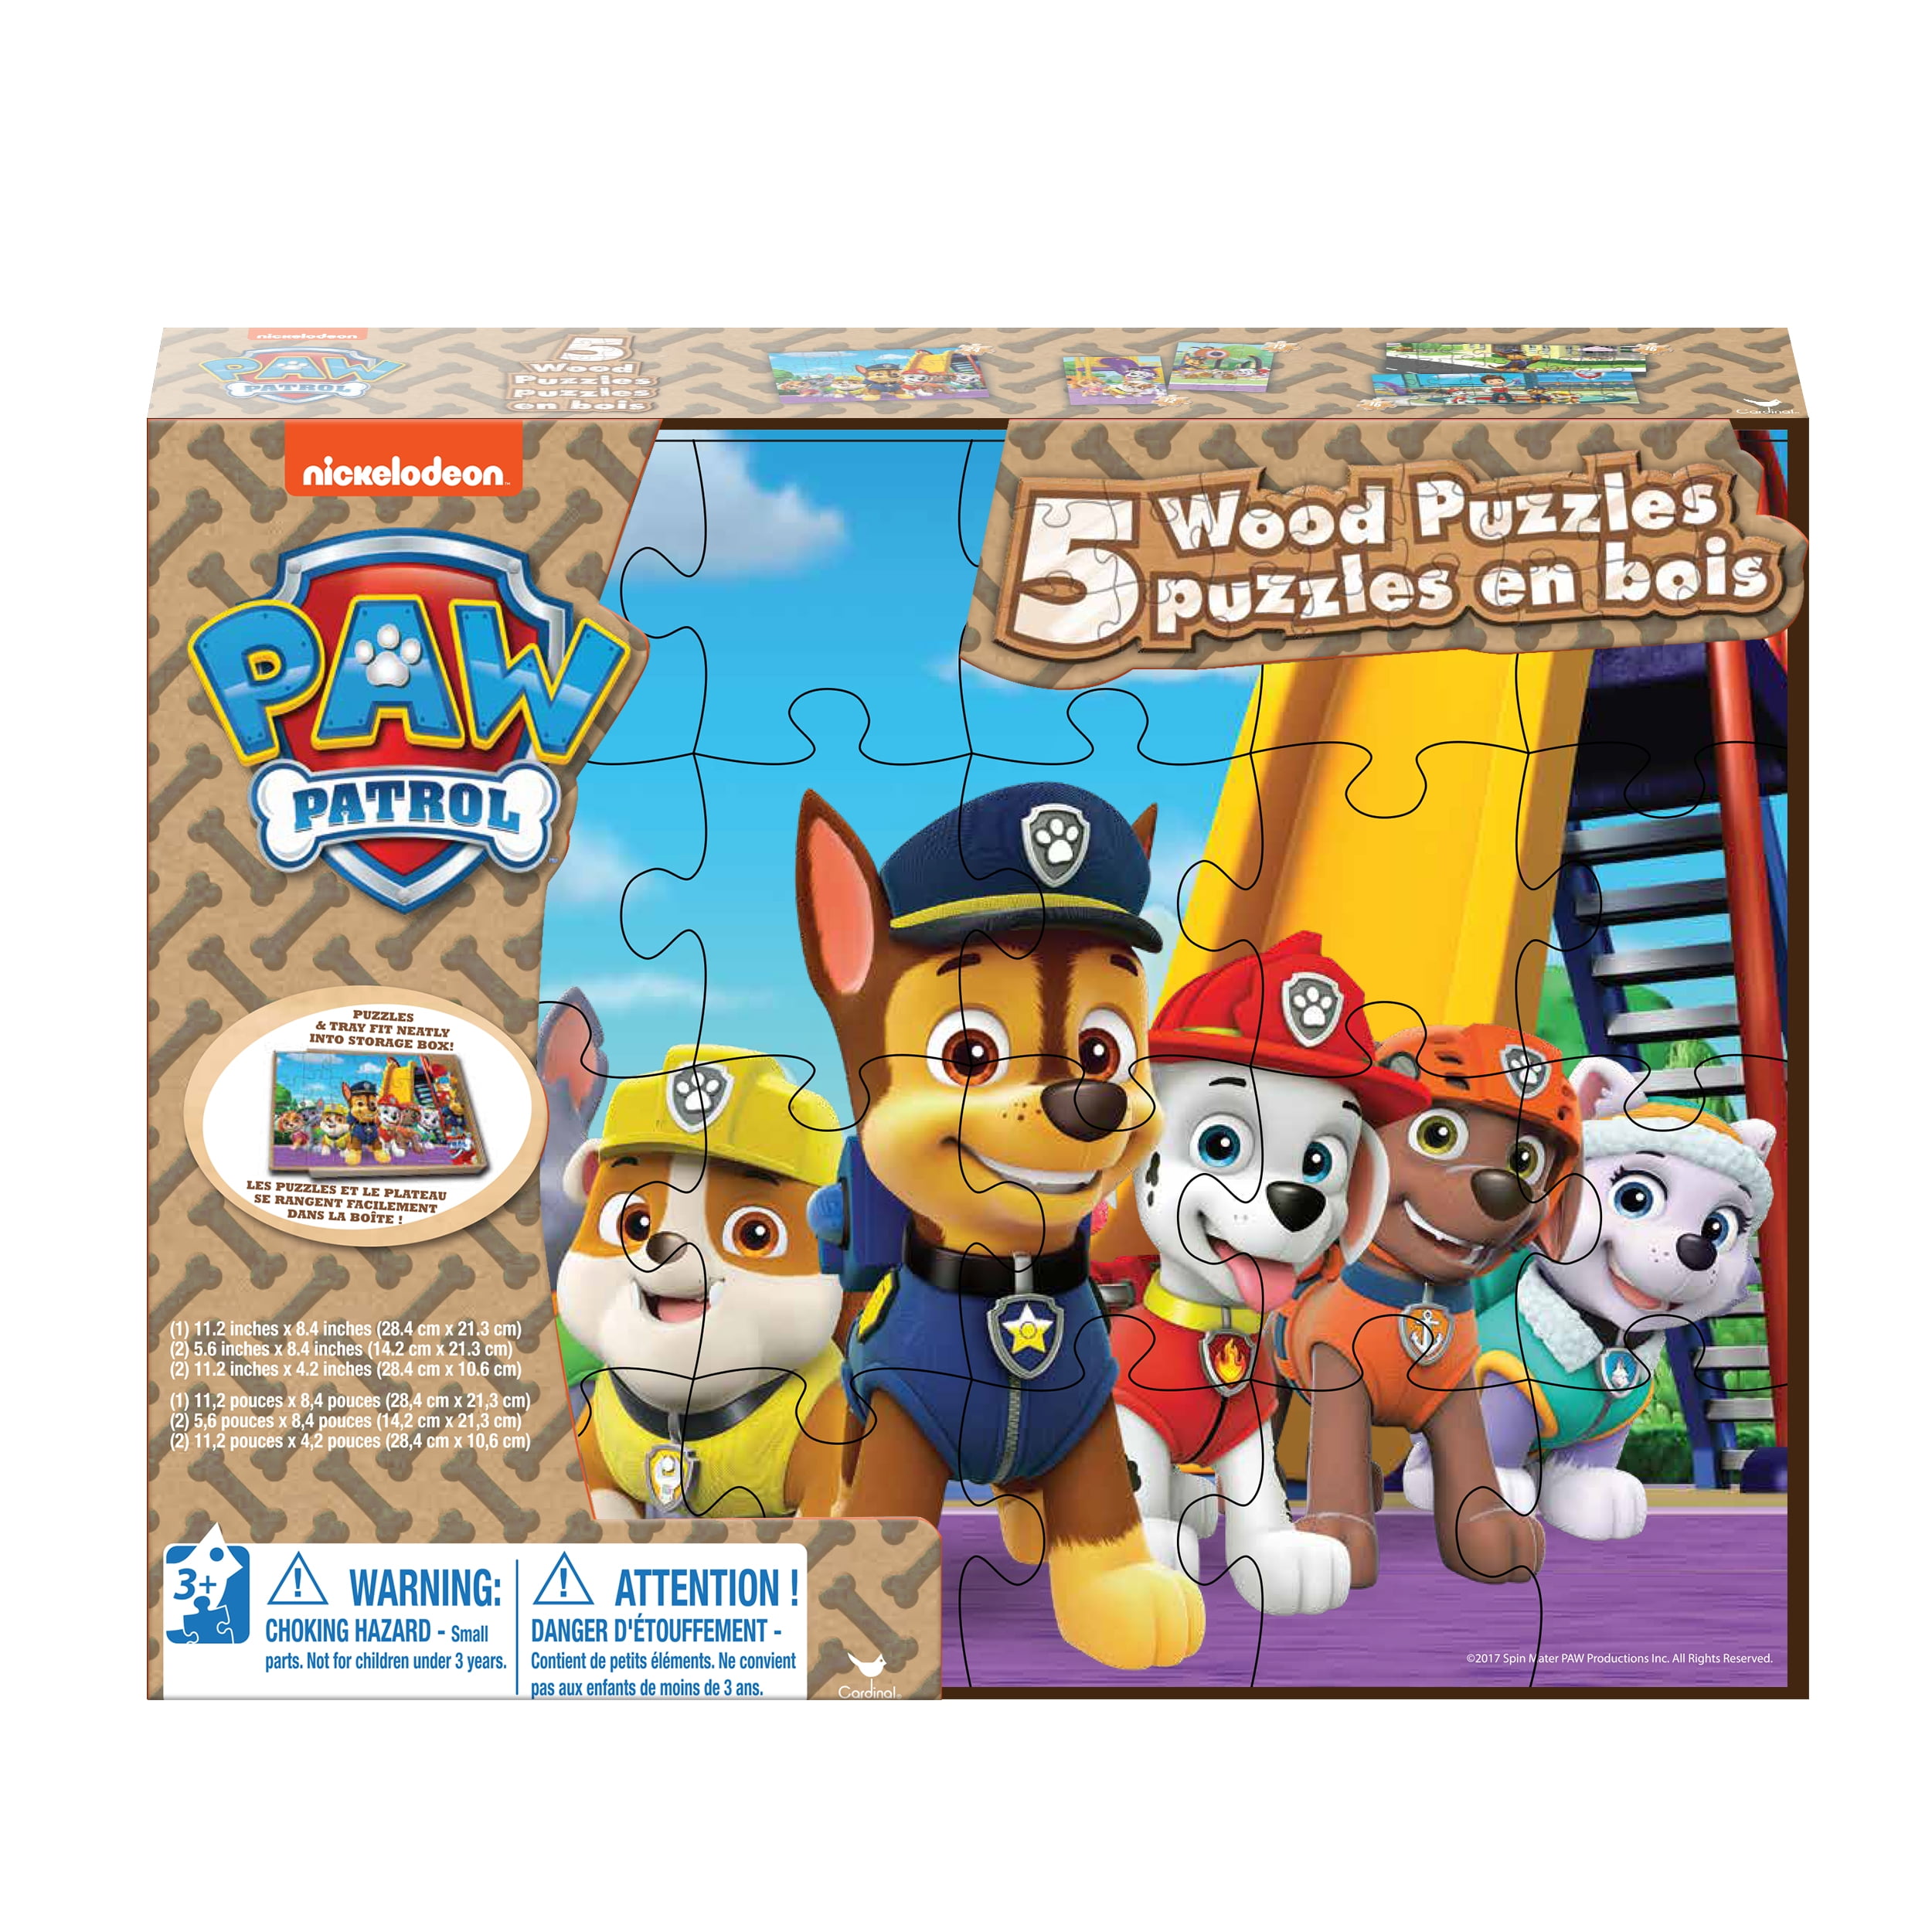 Paw Patrol 5 Wood Puzzles Kid Gifts Wooden Puzzle Game Storage Box Jigsaw Toy 